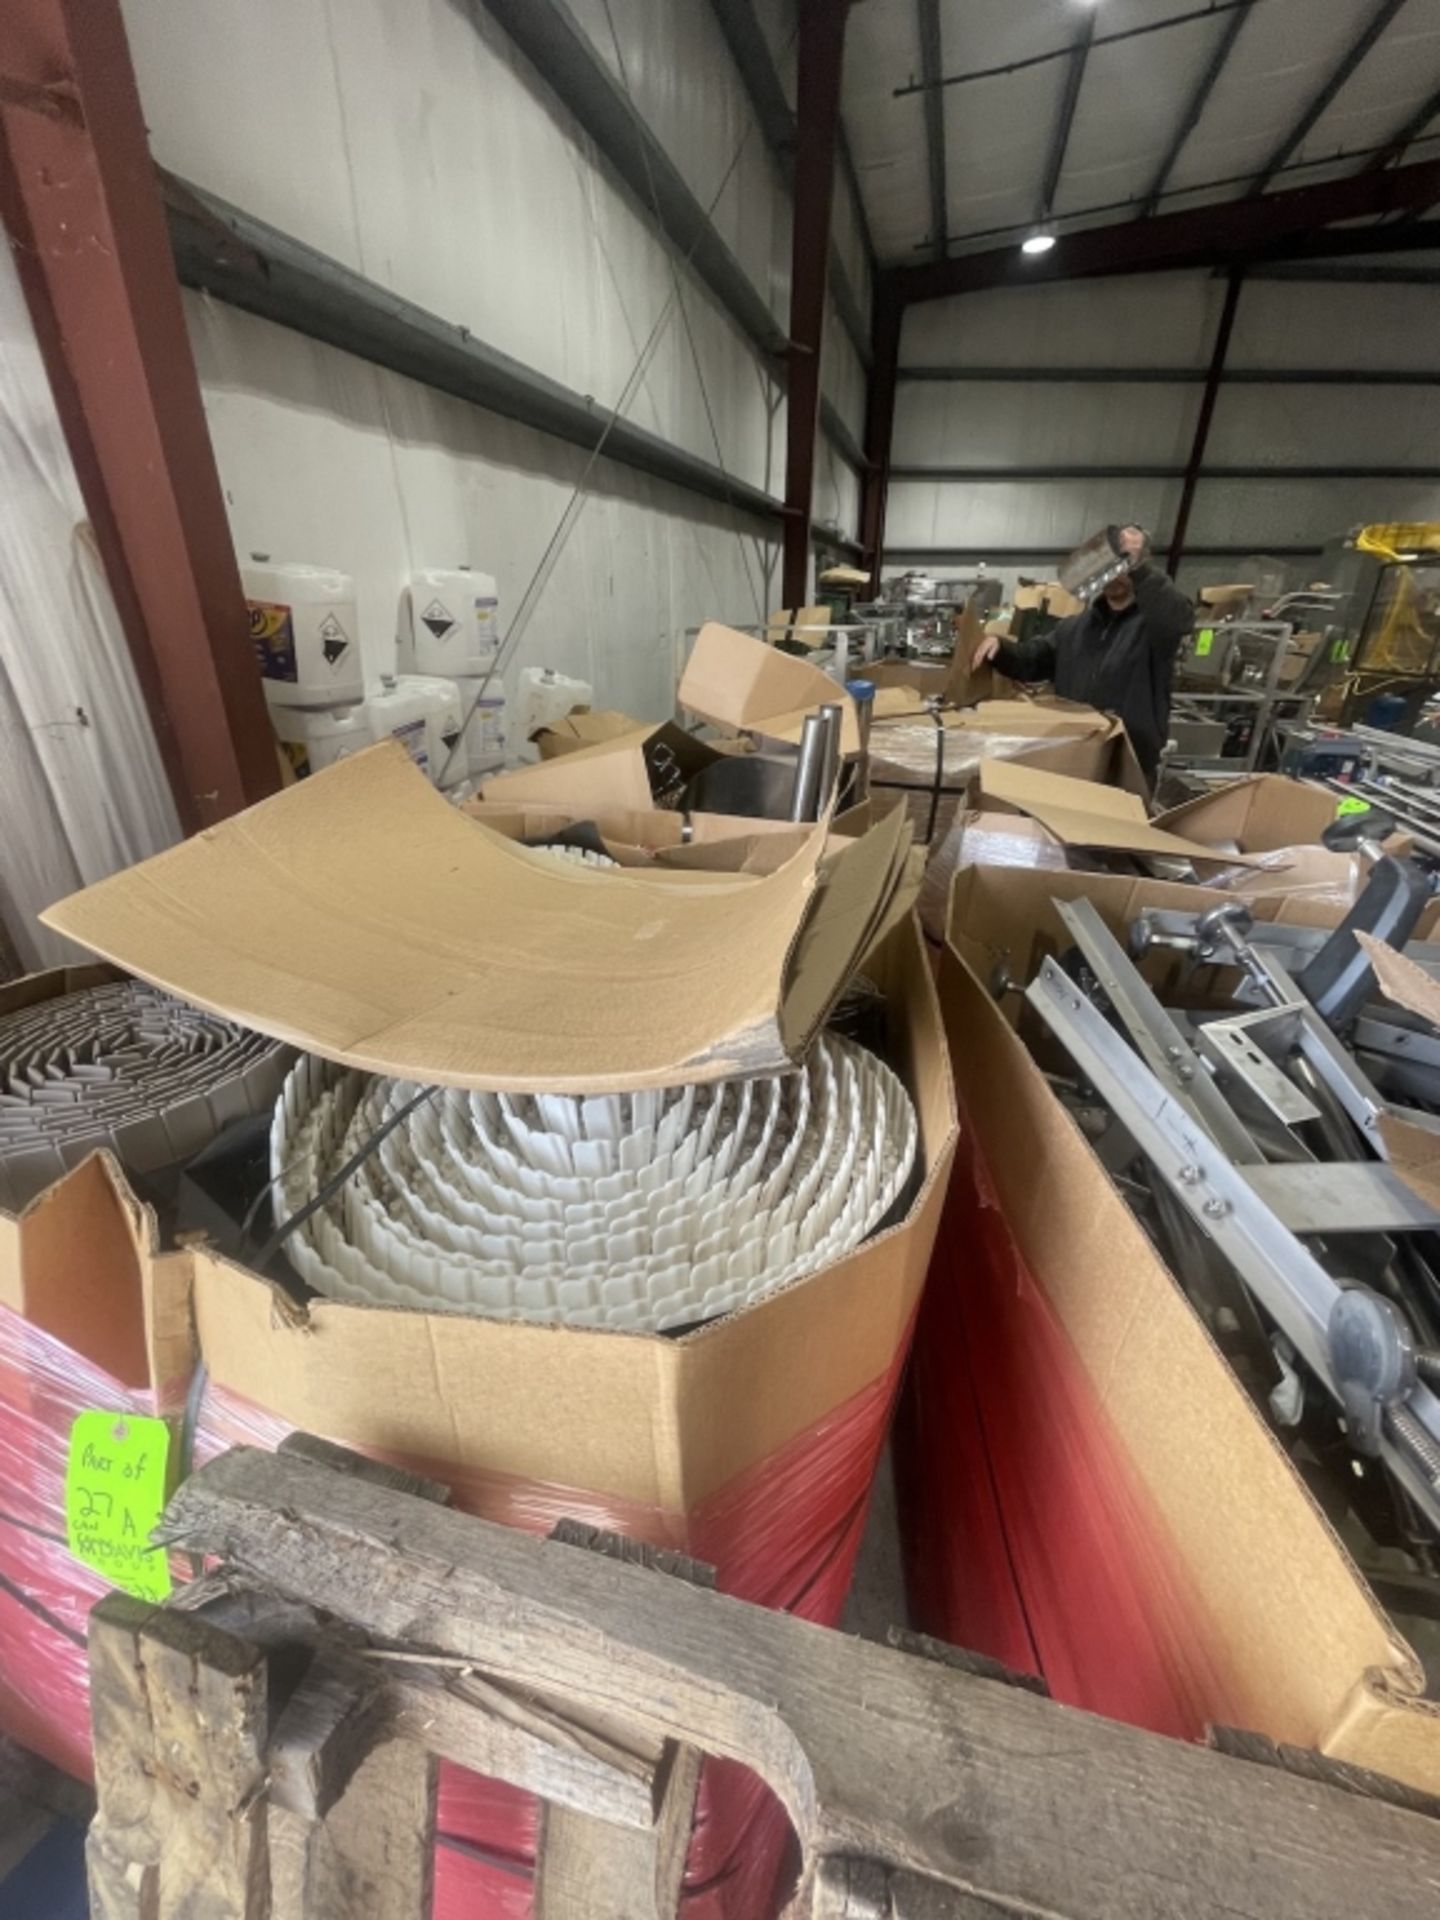 CAN CONVEYOR SYSTEMS (2019 MFG)(Loading, Handling & Site Management Fee: $1250.00) - Image 11 of 11